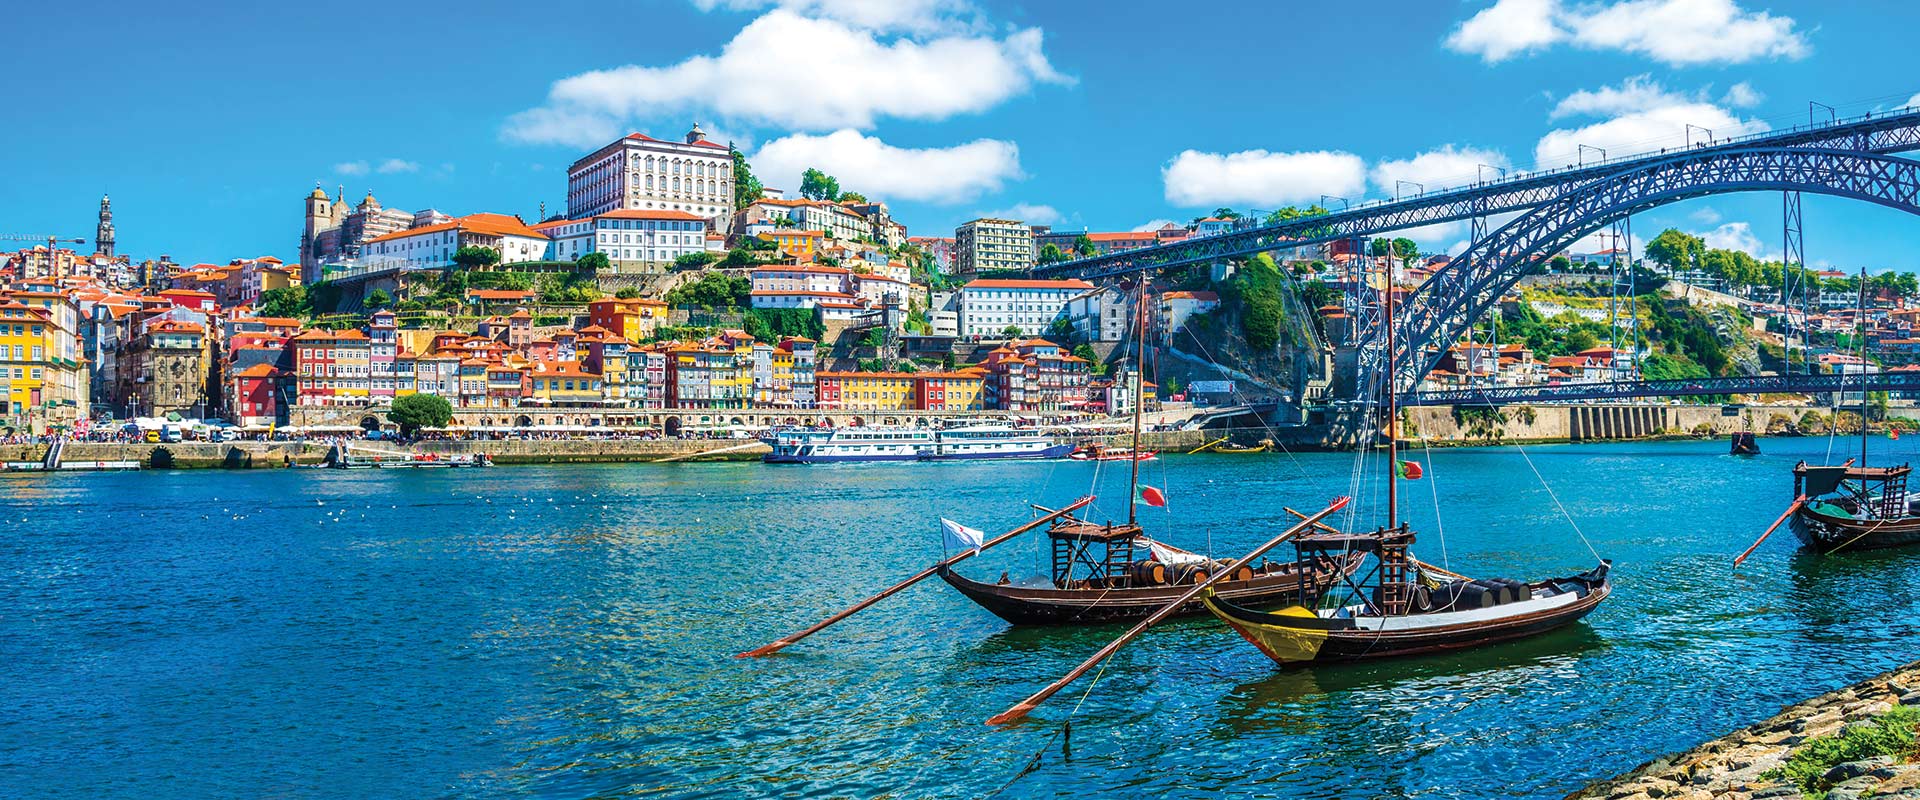 Two boats on river with city buildings in background, Porto